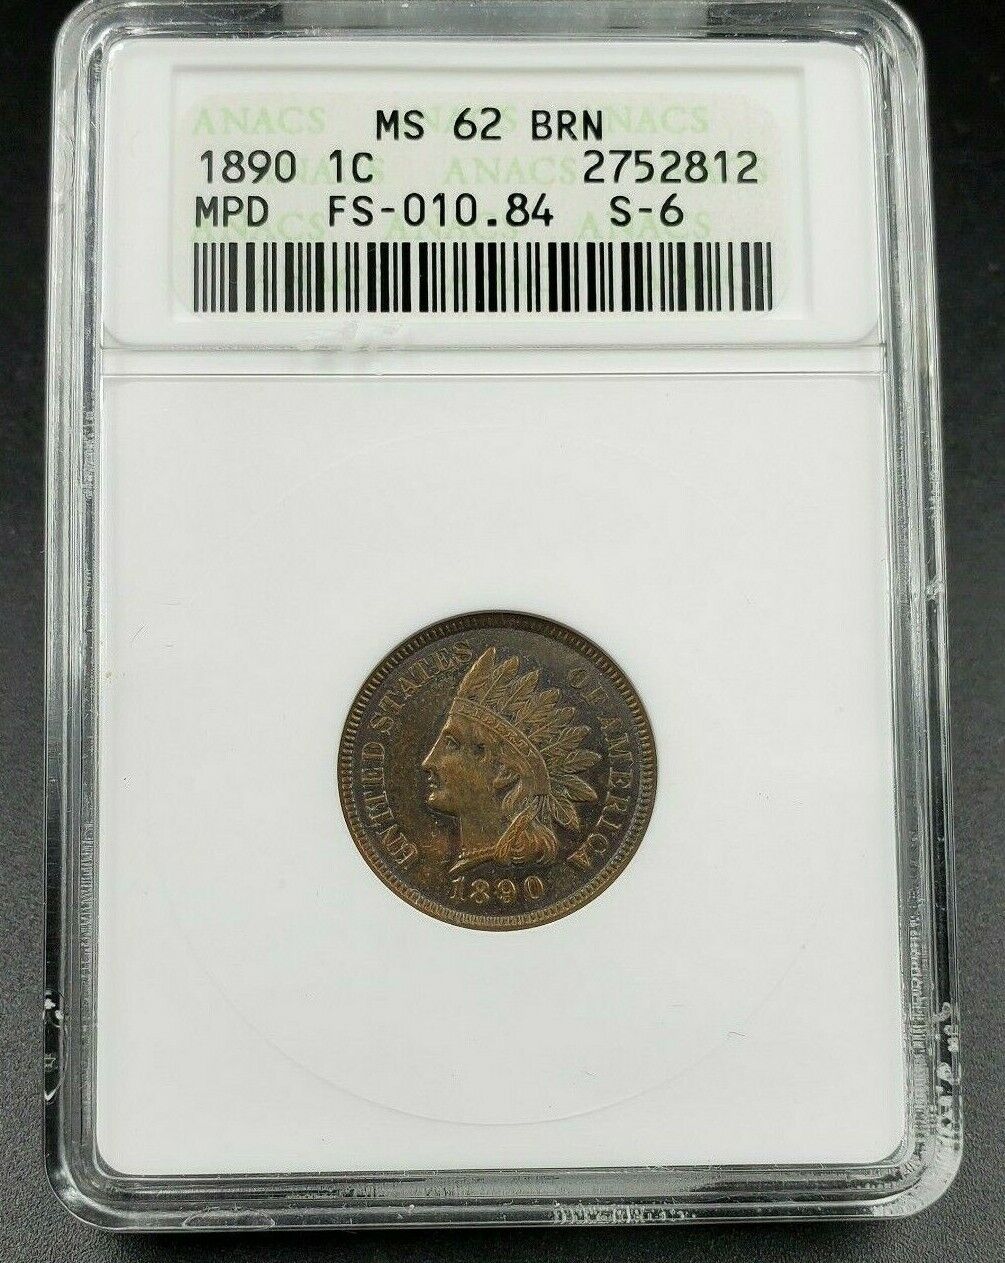 1890 Indian Cent Penny Variety Error Coin ANACS MS62 BN FS-010.84 FS-401 S-4